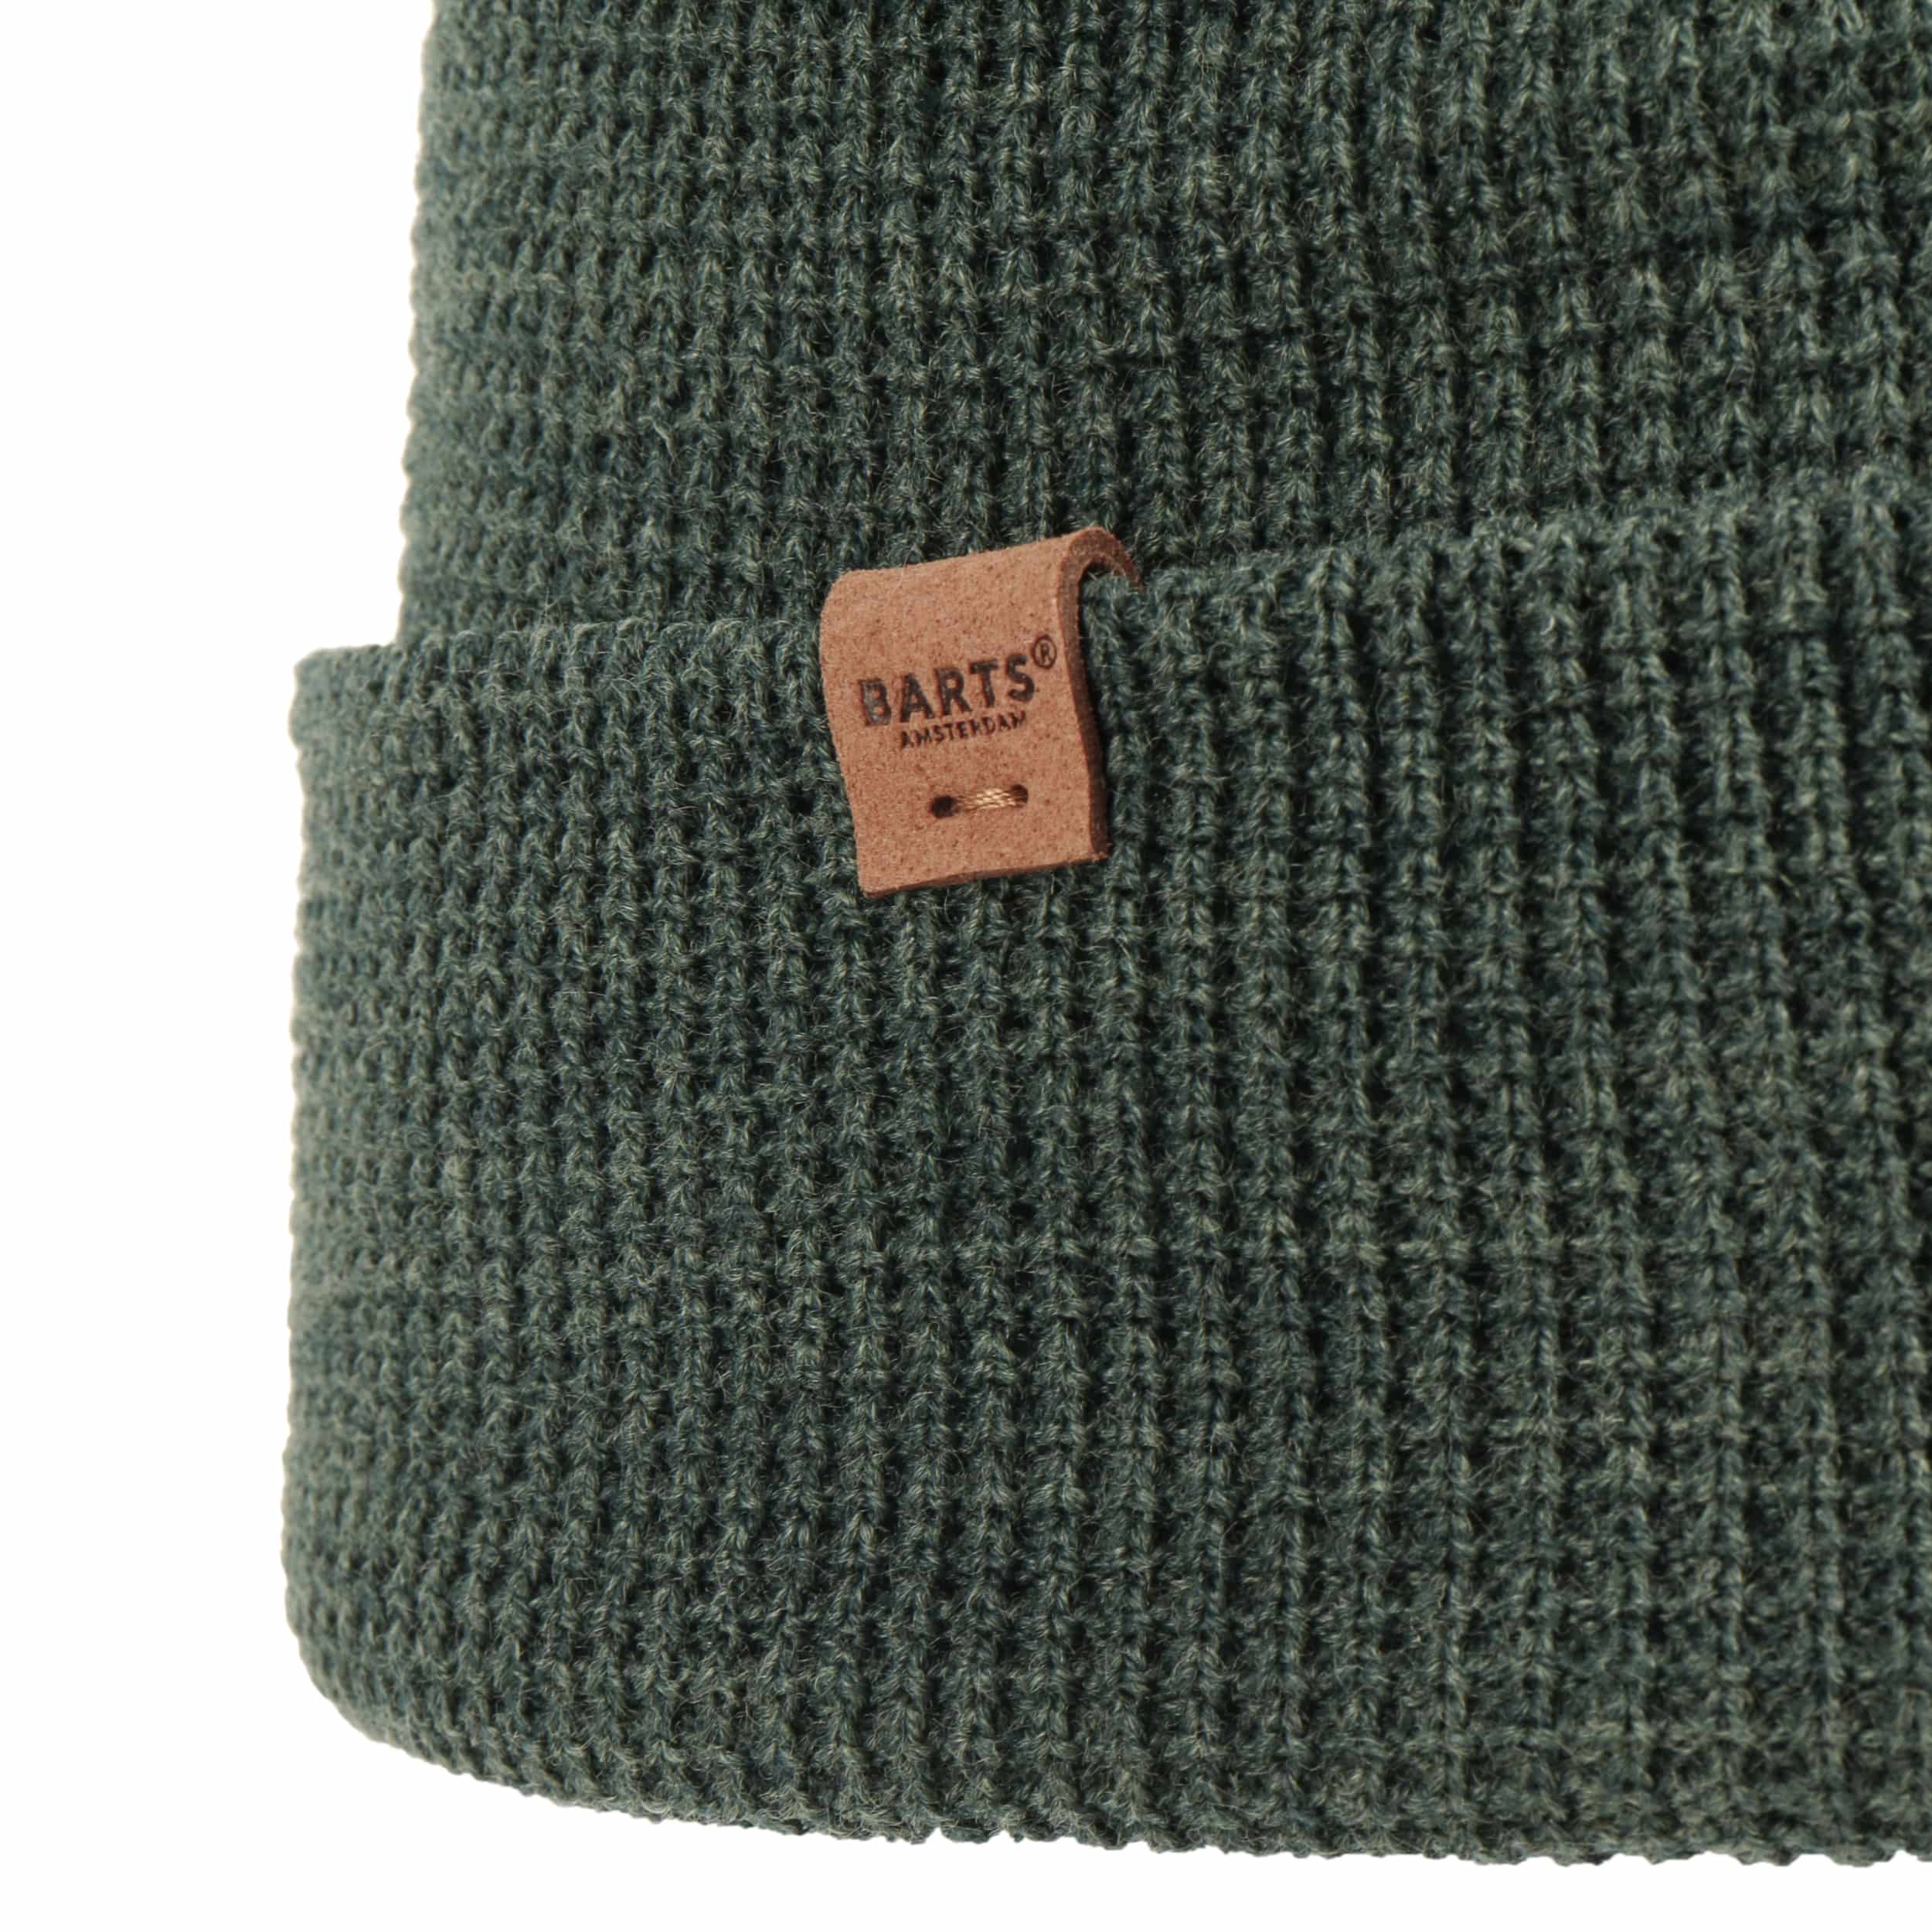 Coler Beanie Hat by Barts - 22,95 £